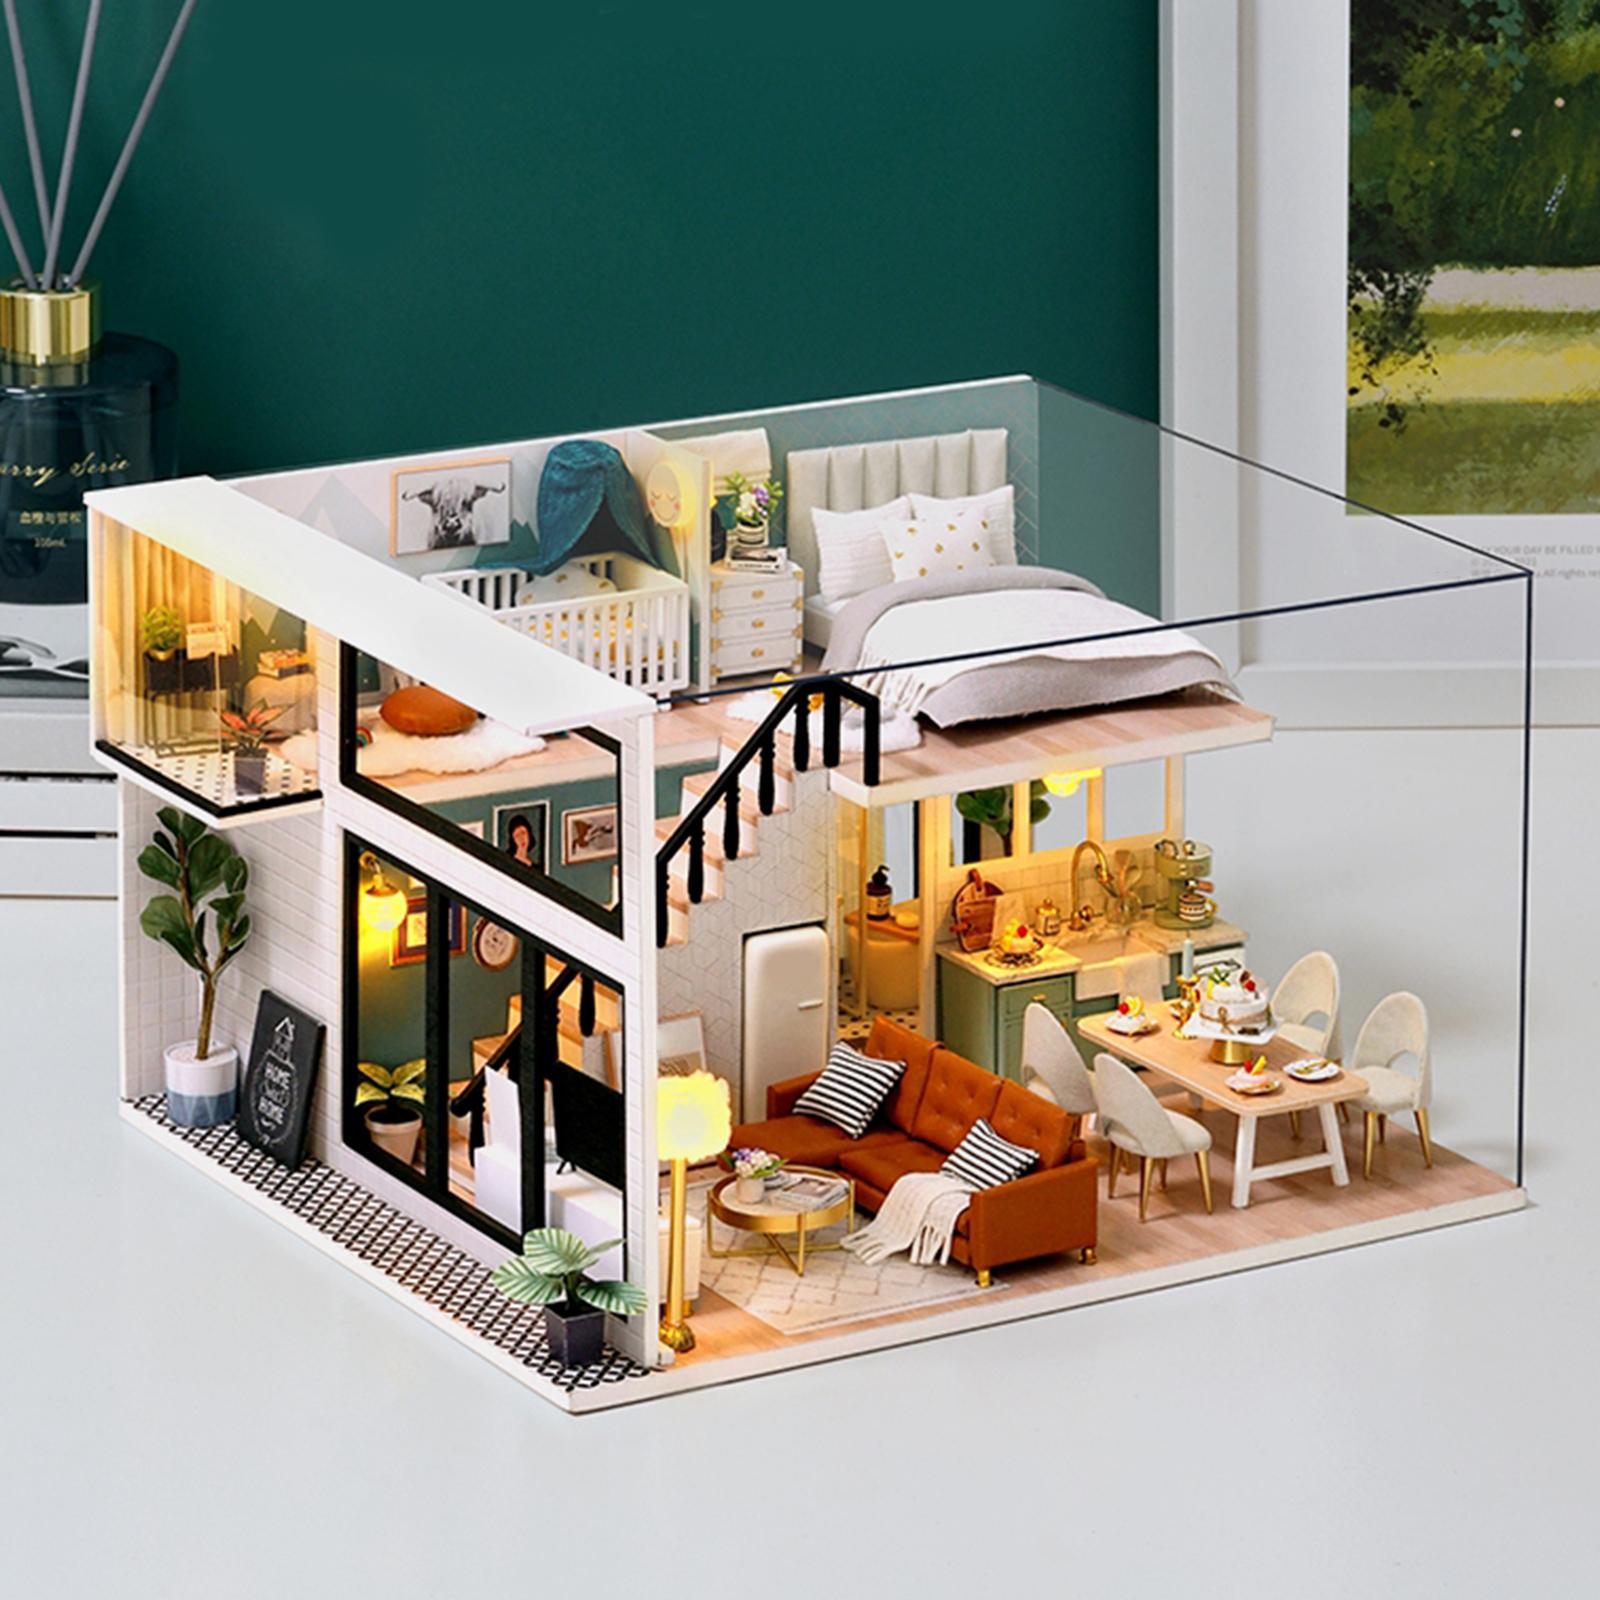 DIY Miniature Dollhouse Kit with Furniture Wooden House Without Dust Proof